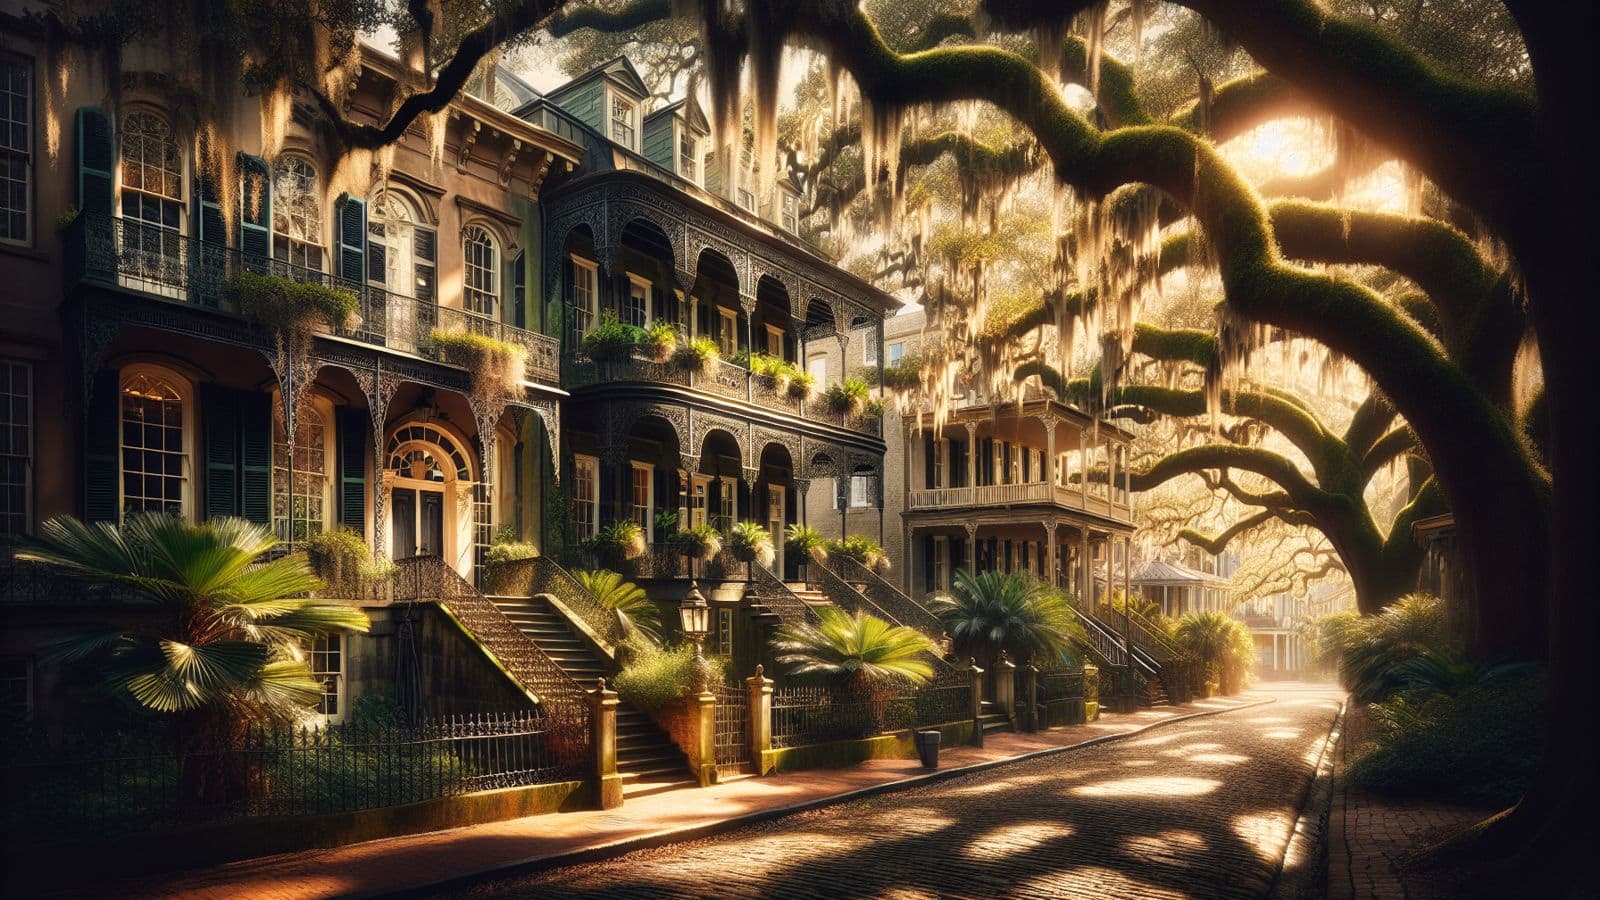 Explore Savannah's historic charm with this travel guide